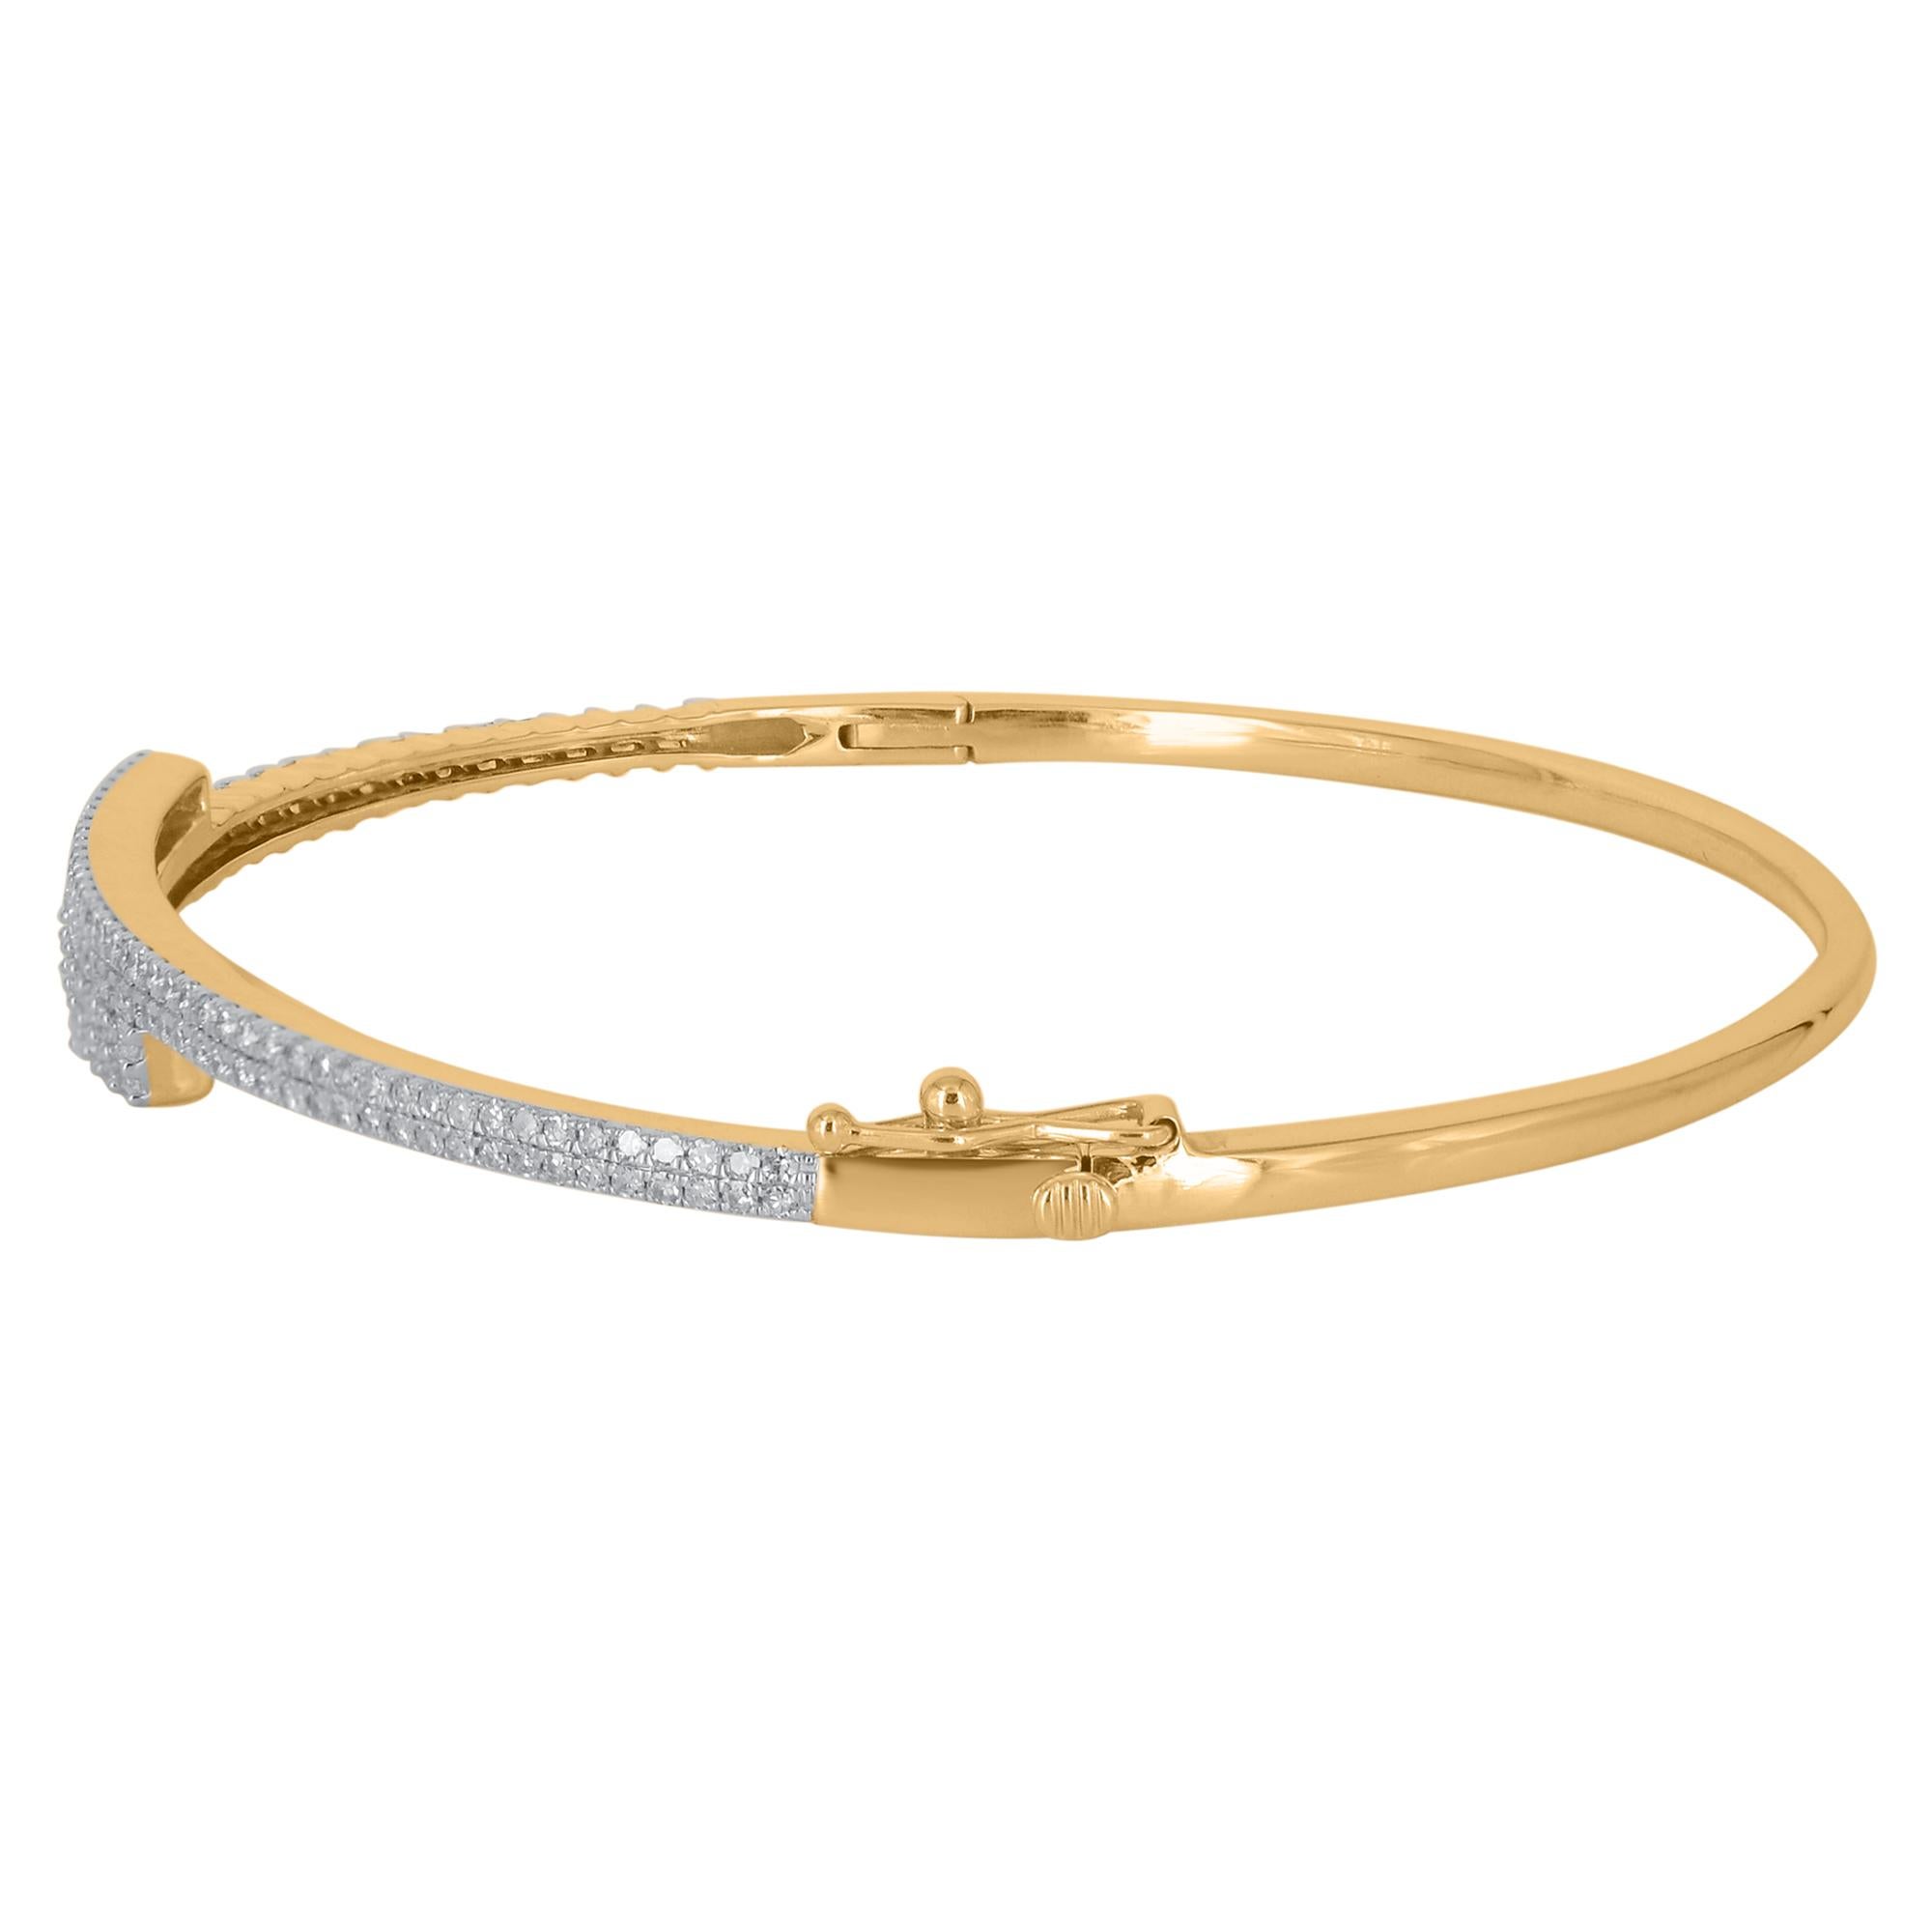 Add a sweet touch to all your favourite looks with this subtle diamond bangle bracelet. This Shimmering bangle bracelet features 142 natural single cut, brilliant cut & baguette diamonds in prong setting and crafted in 18kt yellow gold. Diamonds are